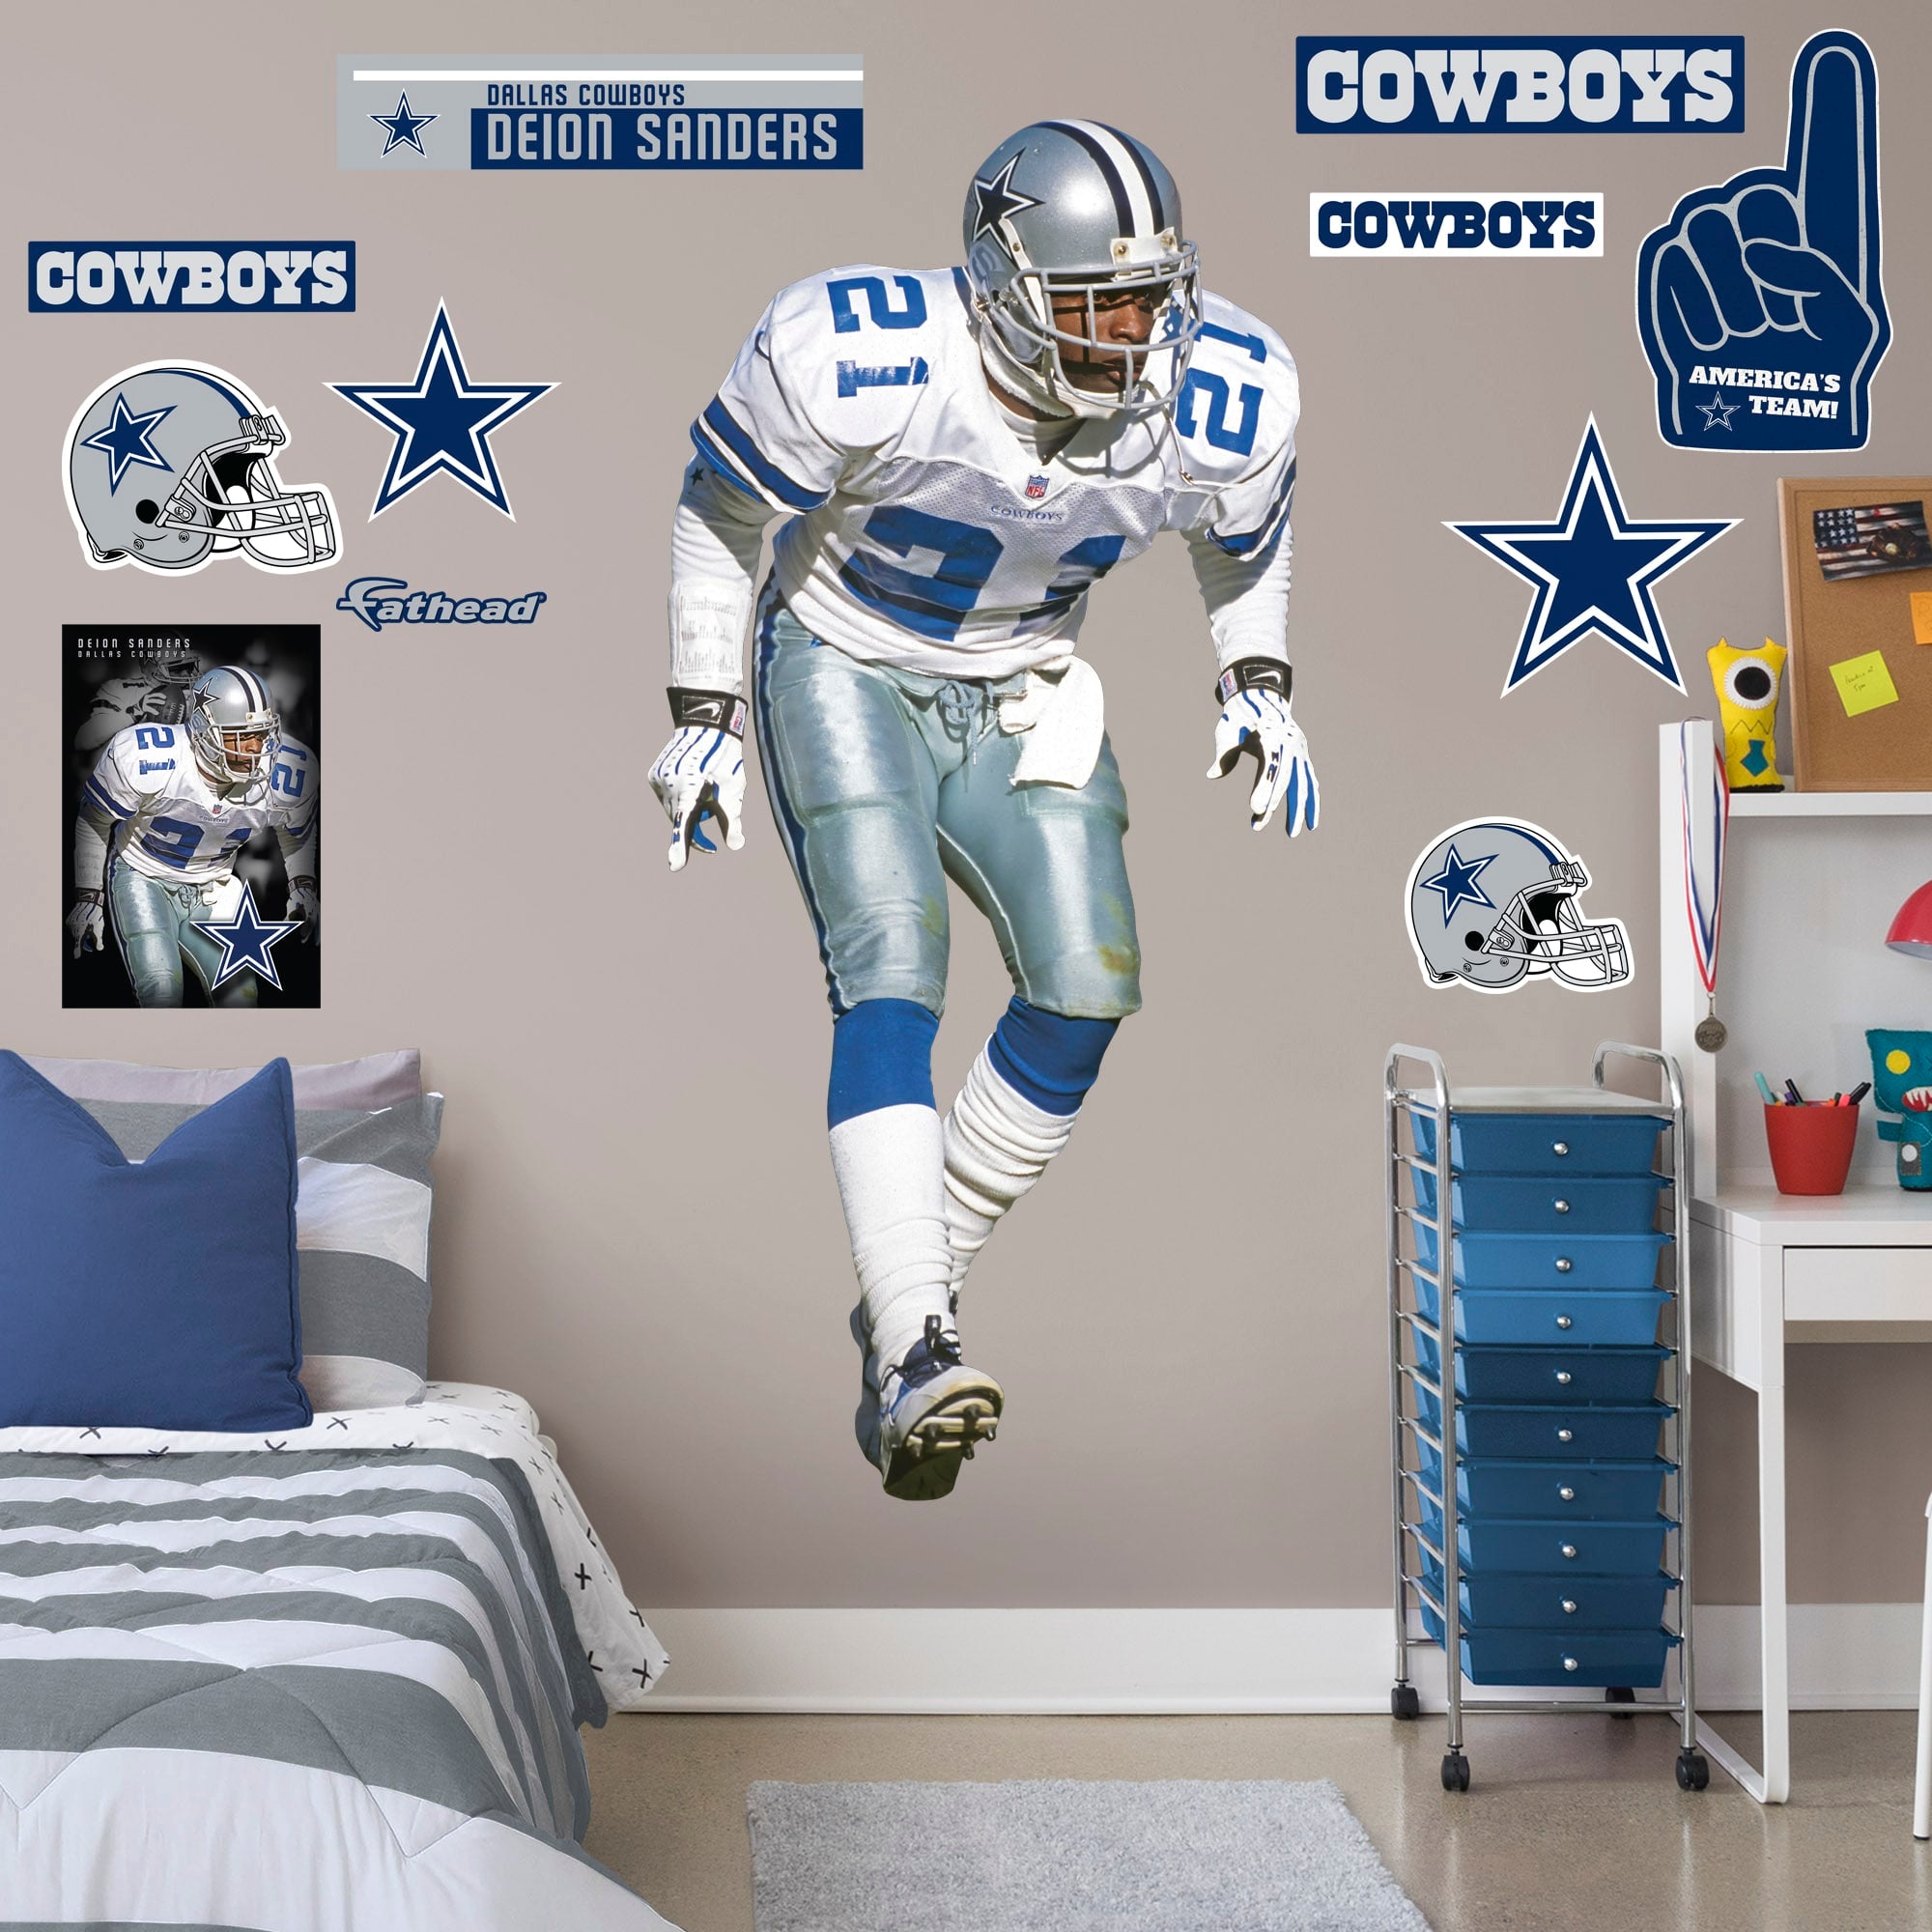 Deion Sanders for Dallas Cowboys: Legend - Officially Licensed NFL Removable Wall Decal Life-Size Athlete + 11 Decals (37"W x 75